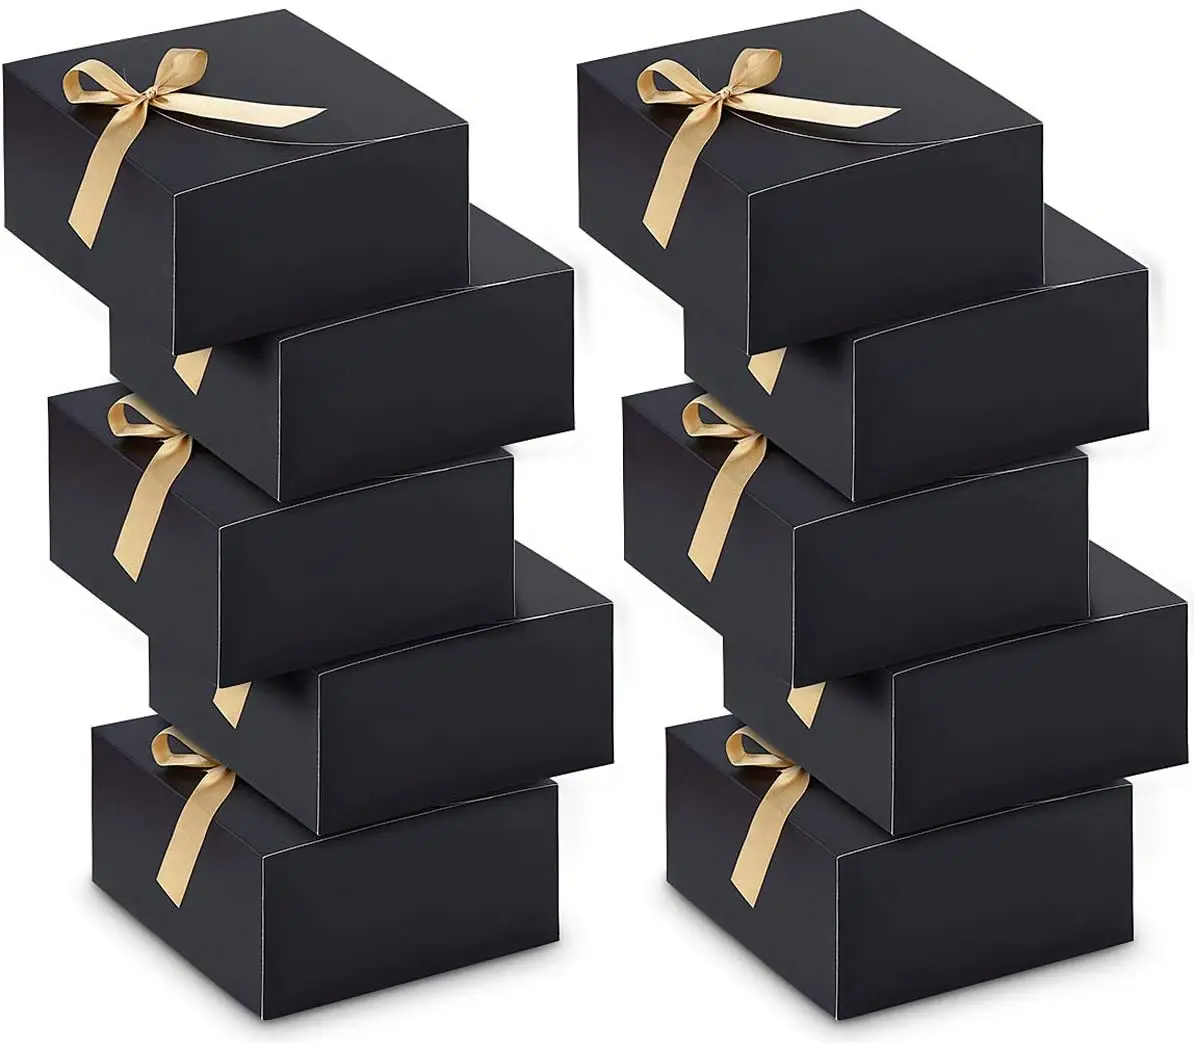  CHARMGIFTBOX 10 Pack Square Nesting Gift Boxes with Lids for  Presents, Black Gift Box with Ribbon Card, Stacking Gift Box for Bridesmaid  Wedding Birthday Party Valentine Christmas Gift Wrapping : Gift